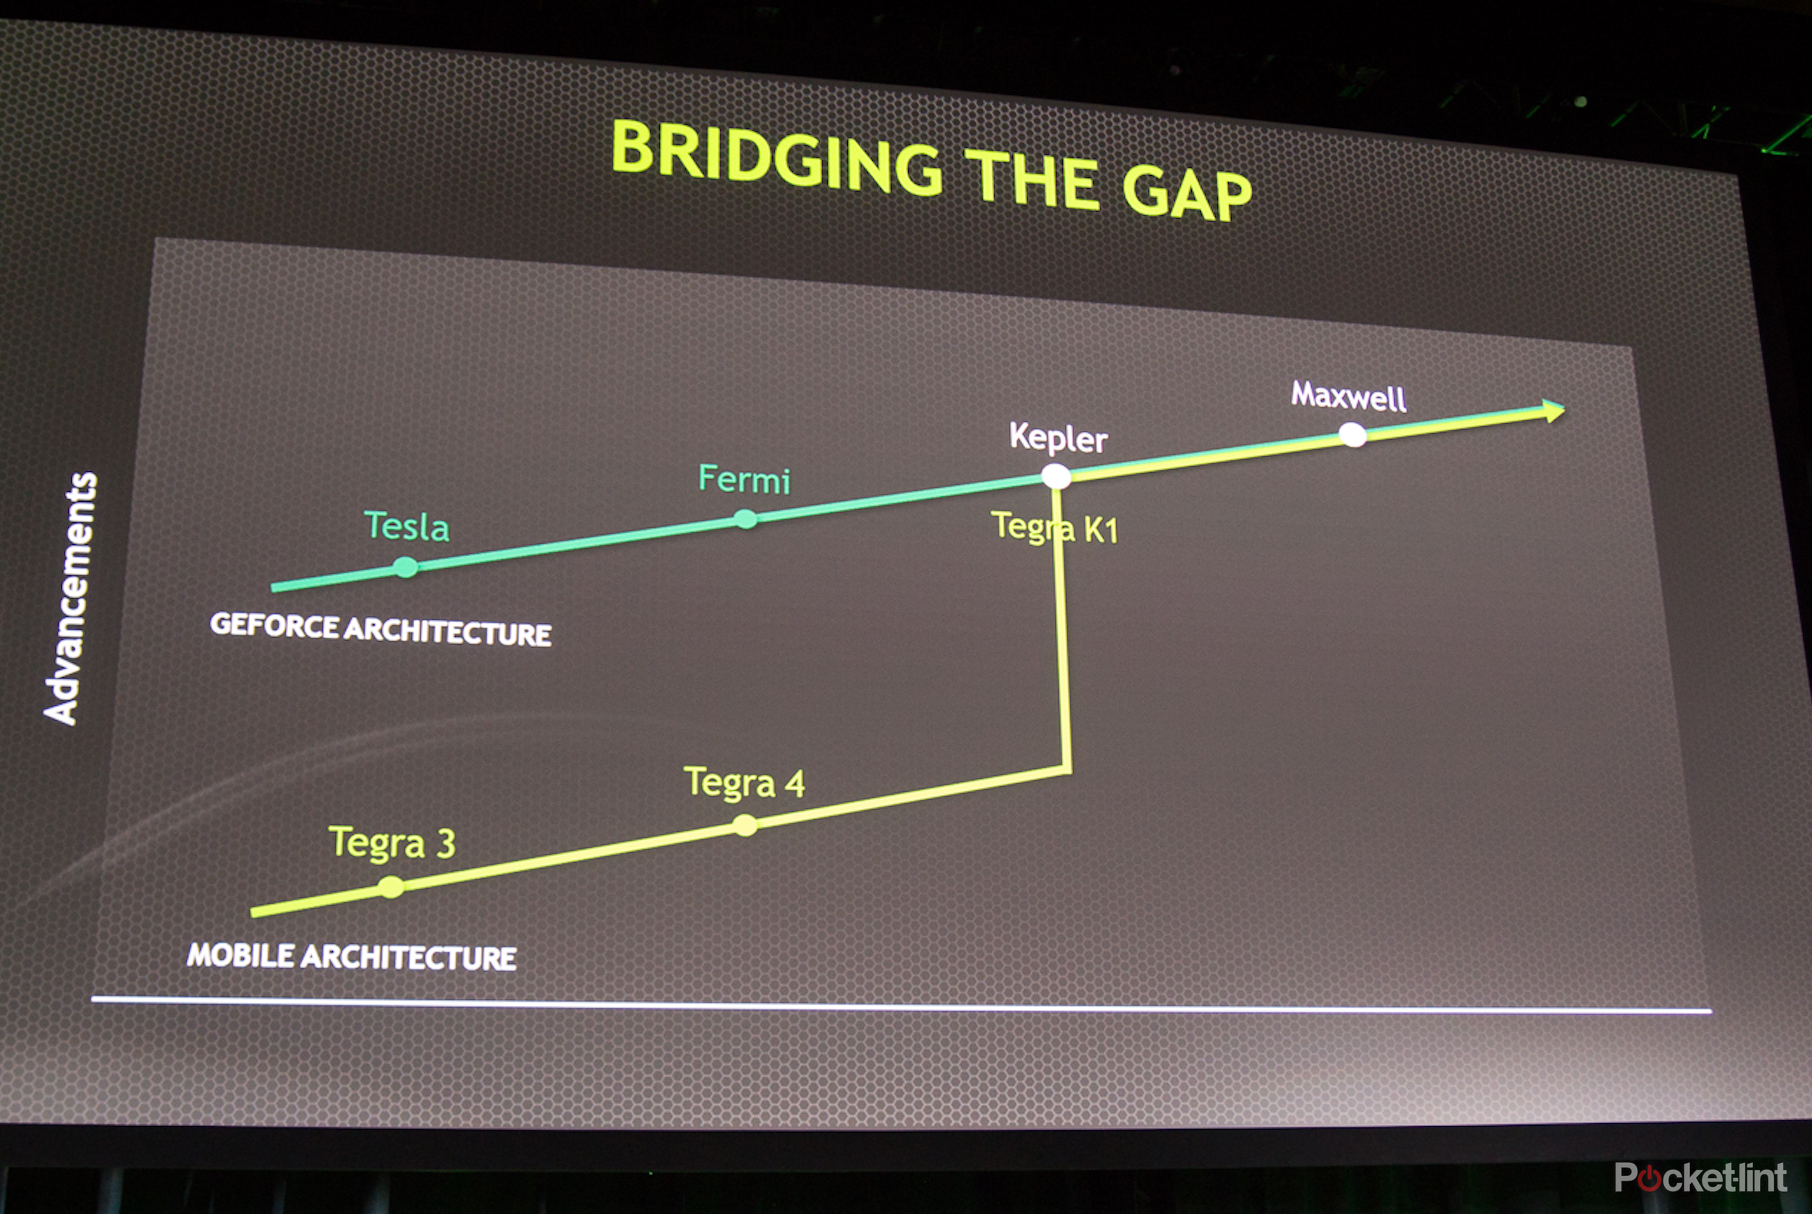 nvidia tegra k1 mobile processor comes with 192 cuda cores beats ps3 and xbox 360 in performance image 2